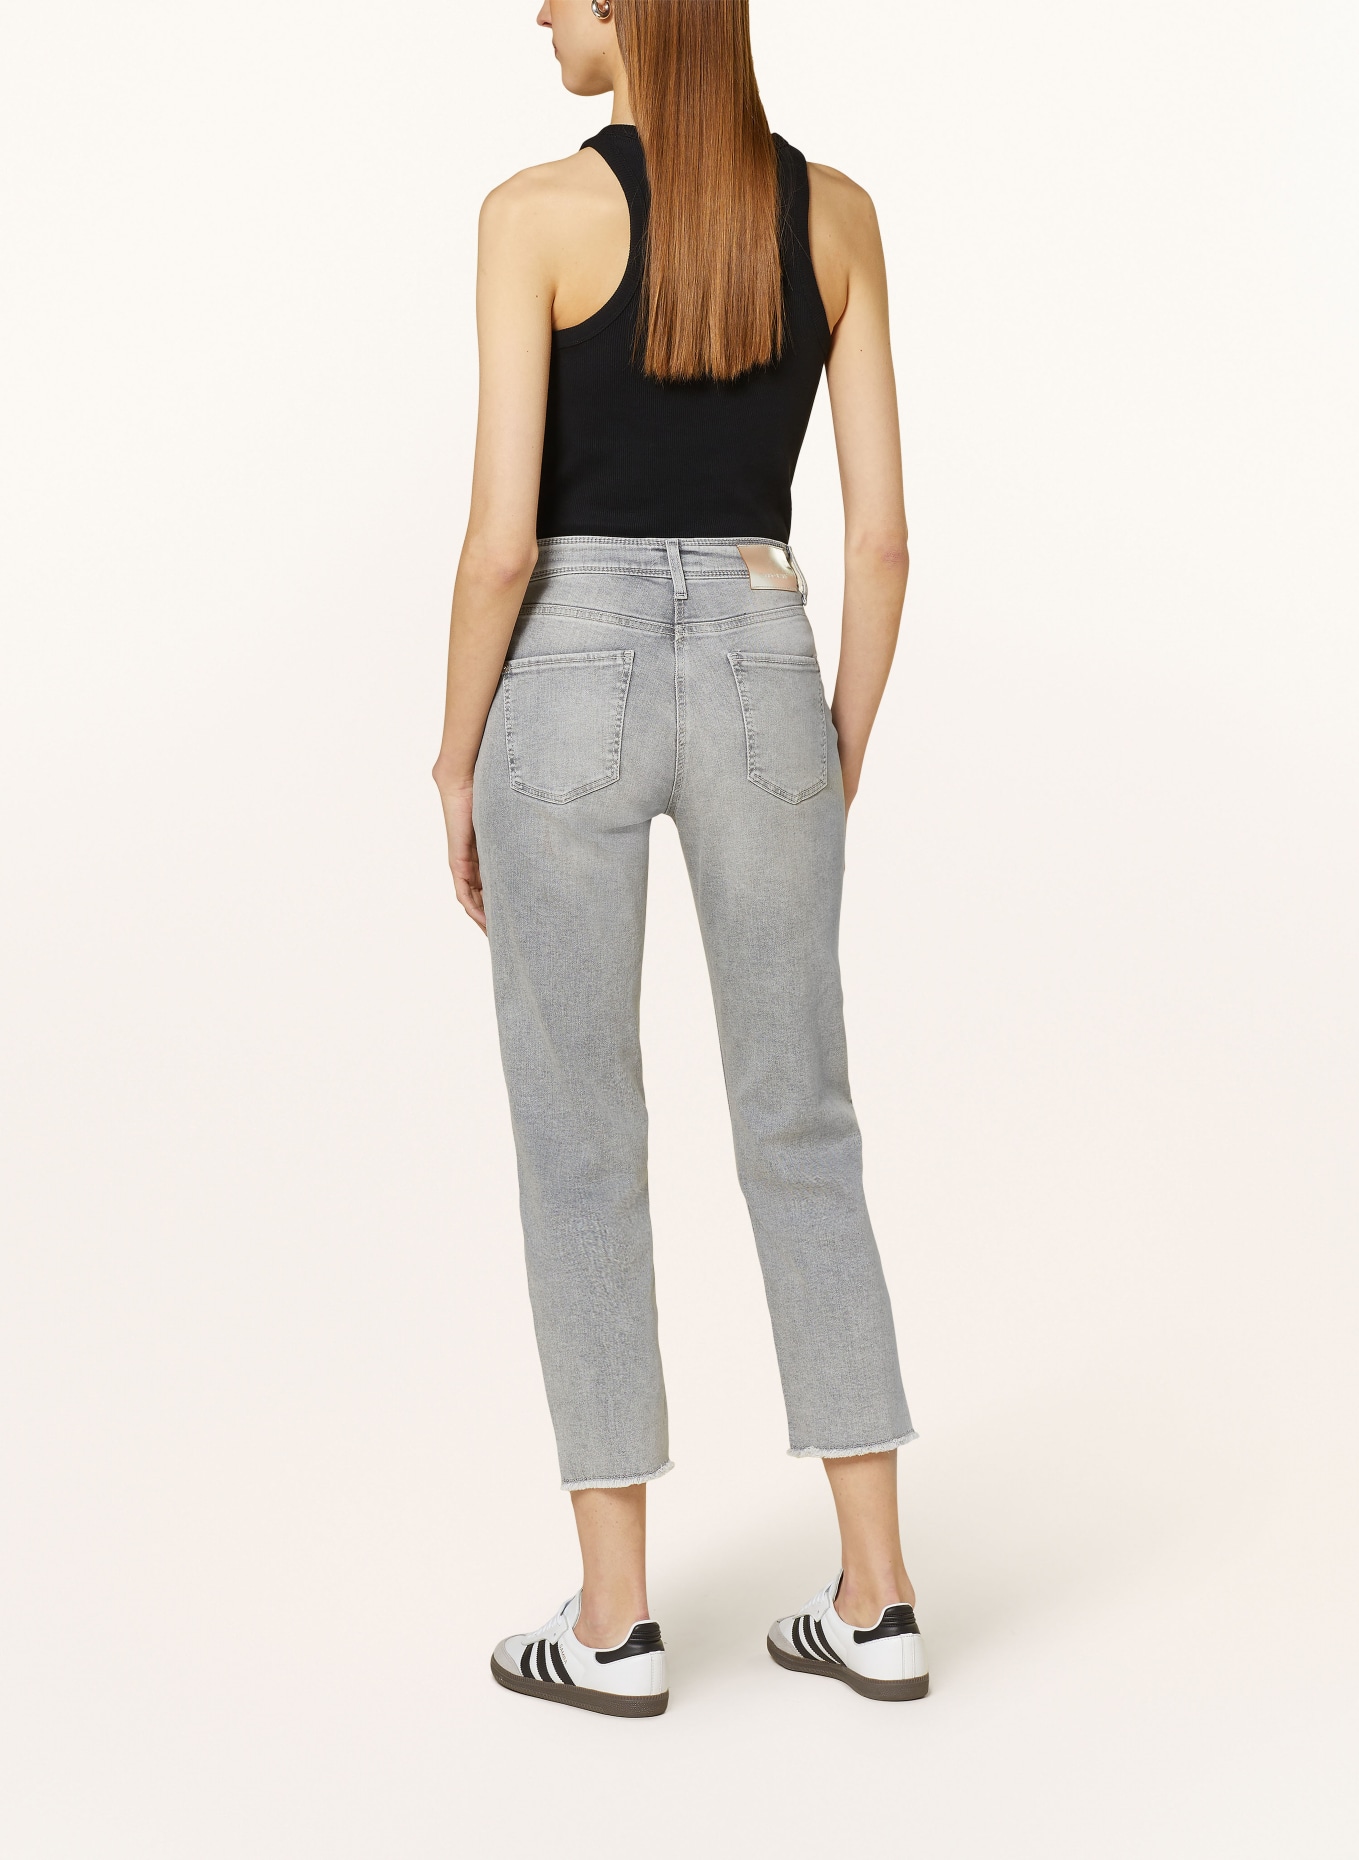 CAMBIO 7/8 jeans PIPER, Color: 5146 light grey fringed hem (Image 3)